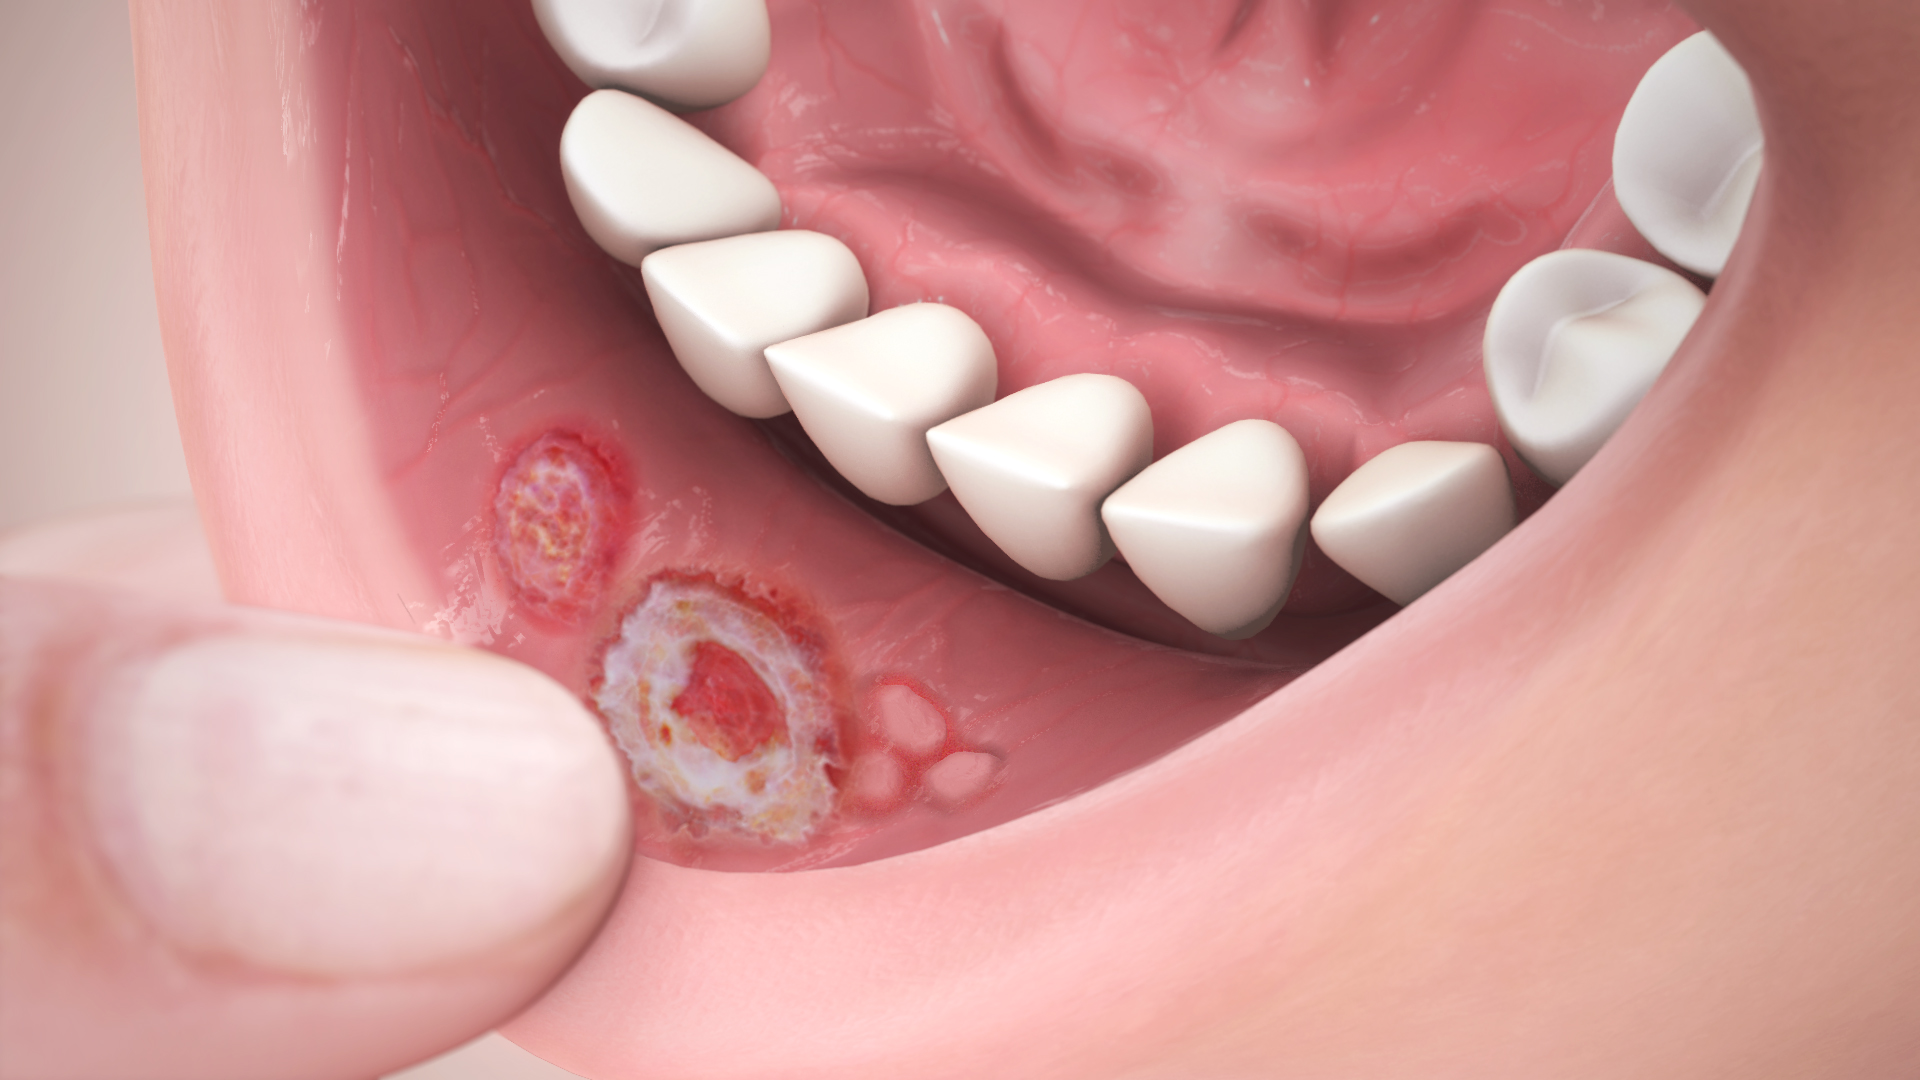 Medical animation still shot showing aphthous ulcers